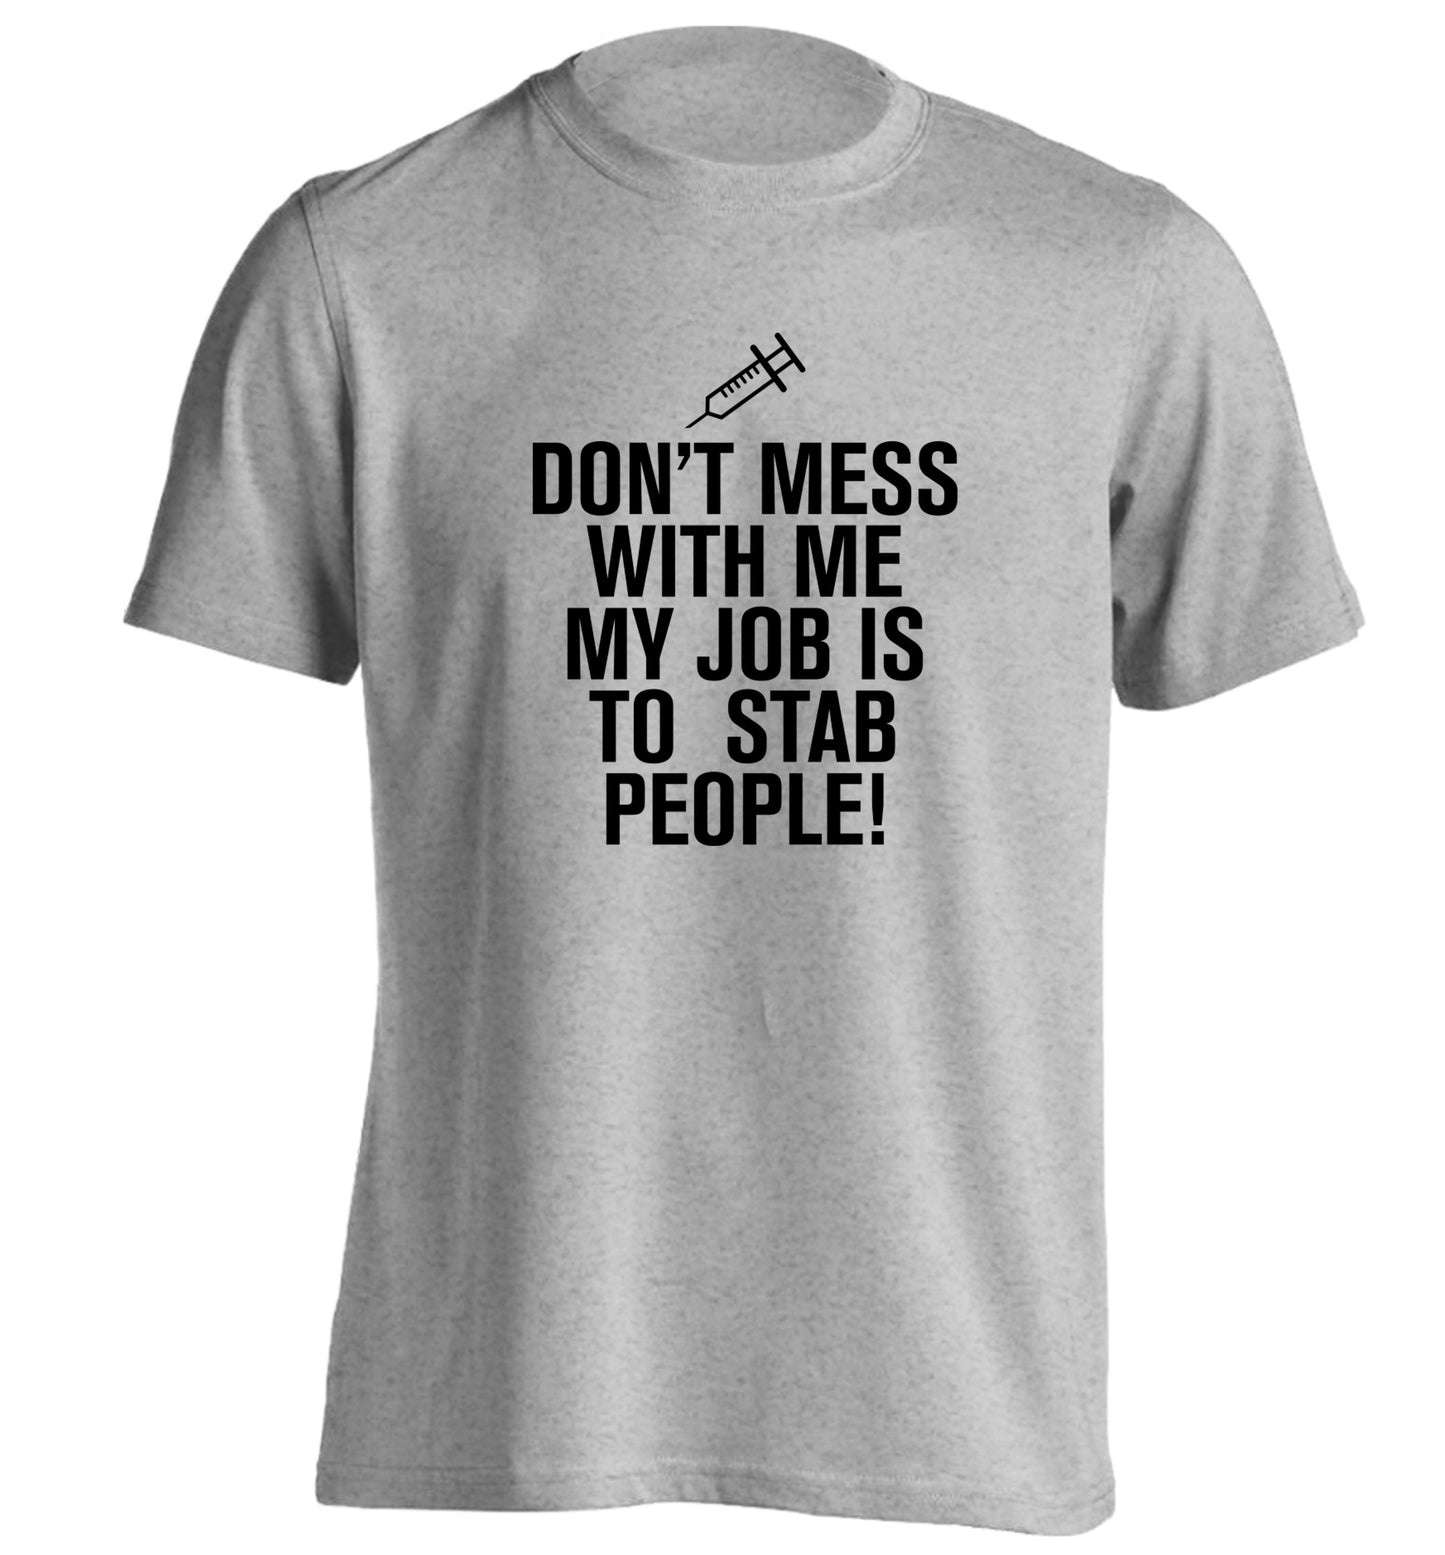 Don't mess with me my job is to stab people! adults unisex grey Tshirt 2XL